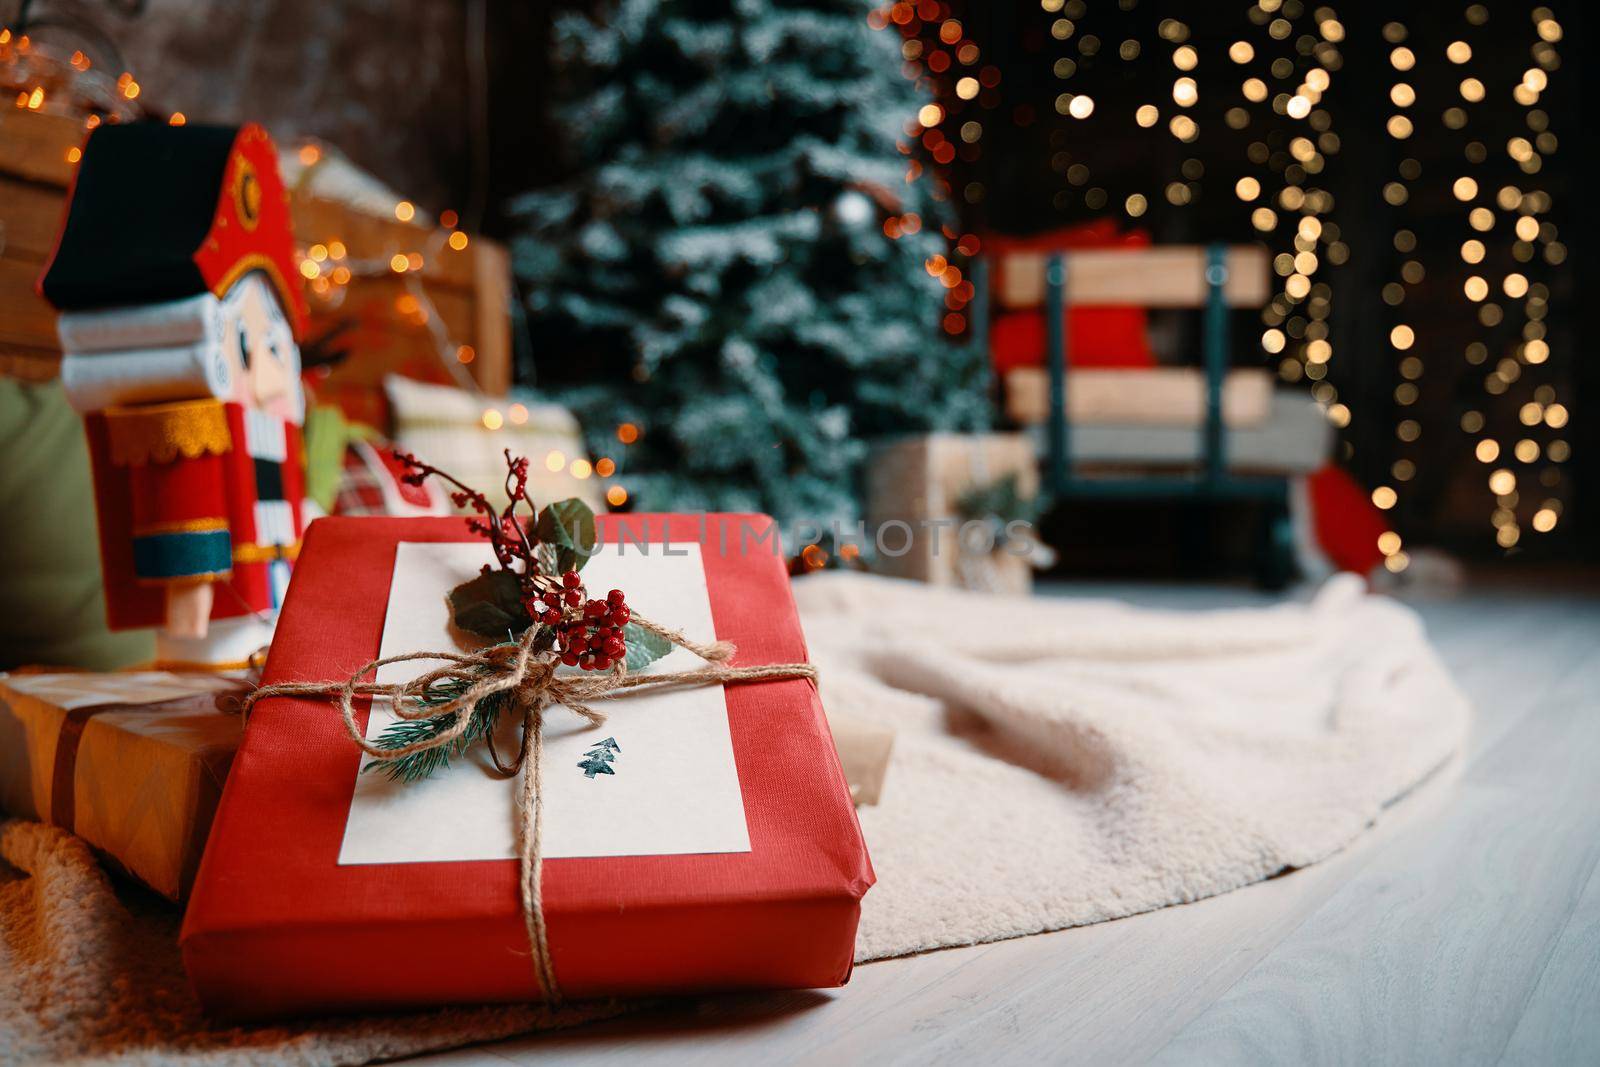 Close-up of gift box and New Year's atmosphere on background. Christmas tree, plaid with colorful pillows on floor, Nutcracker figurine and bright garlands on walls. Festive interior in photo studio.